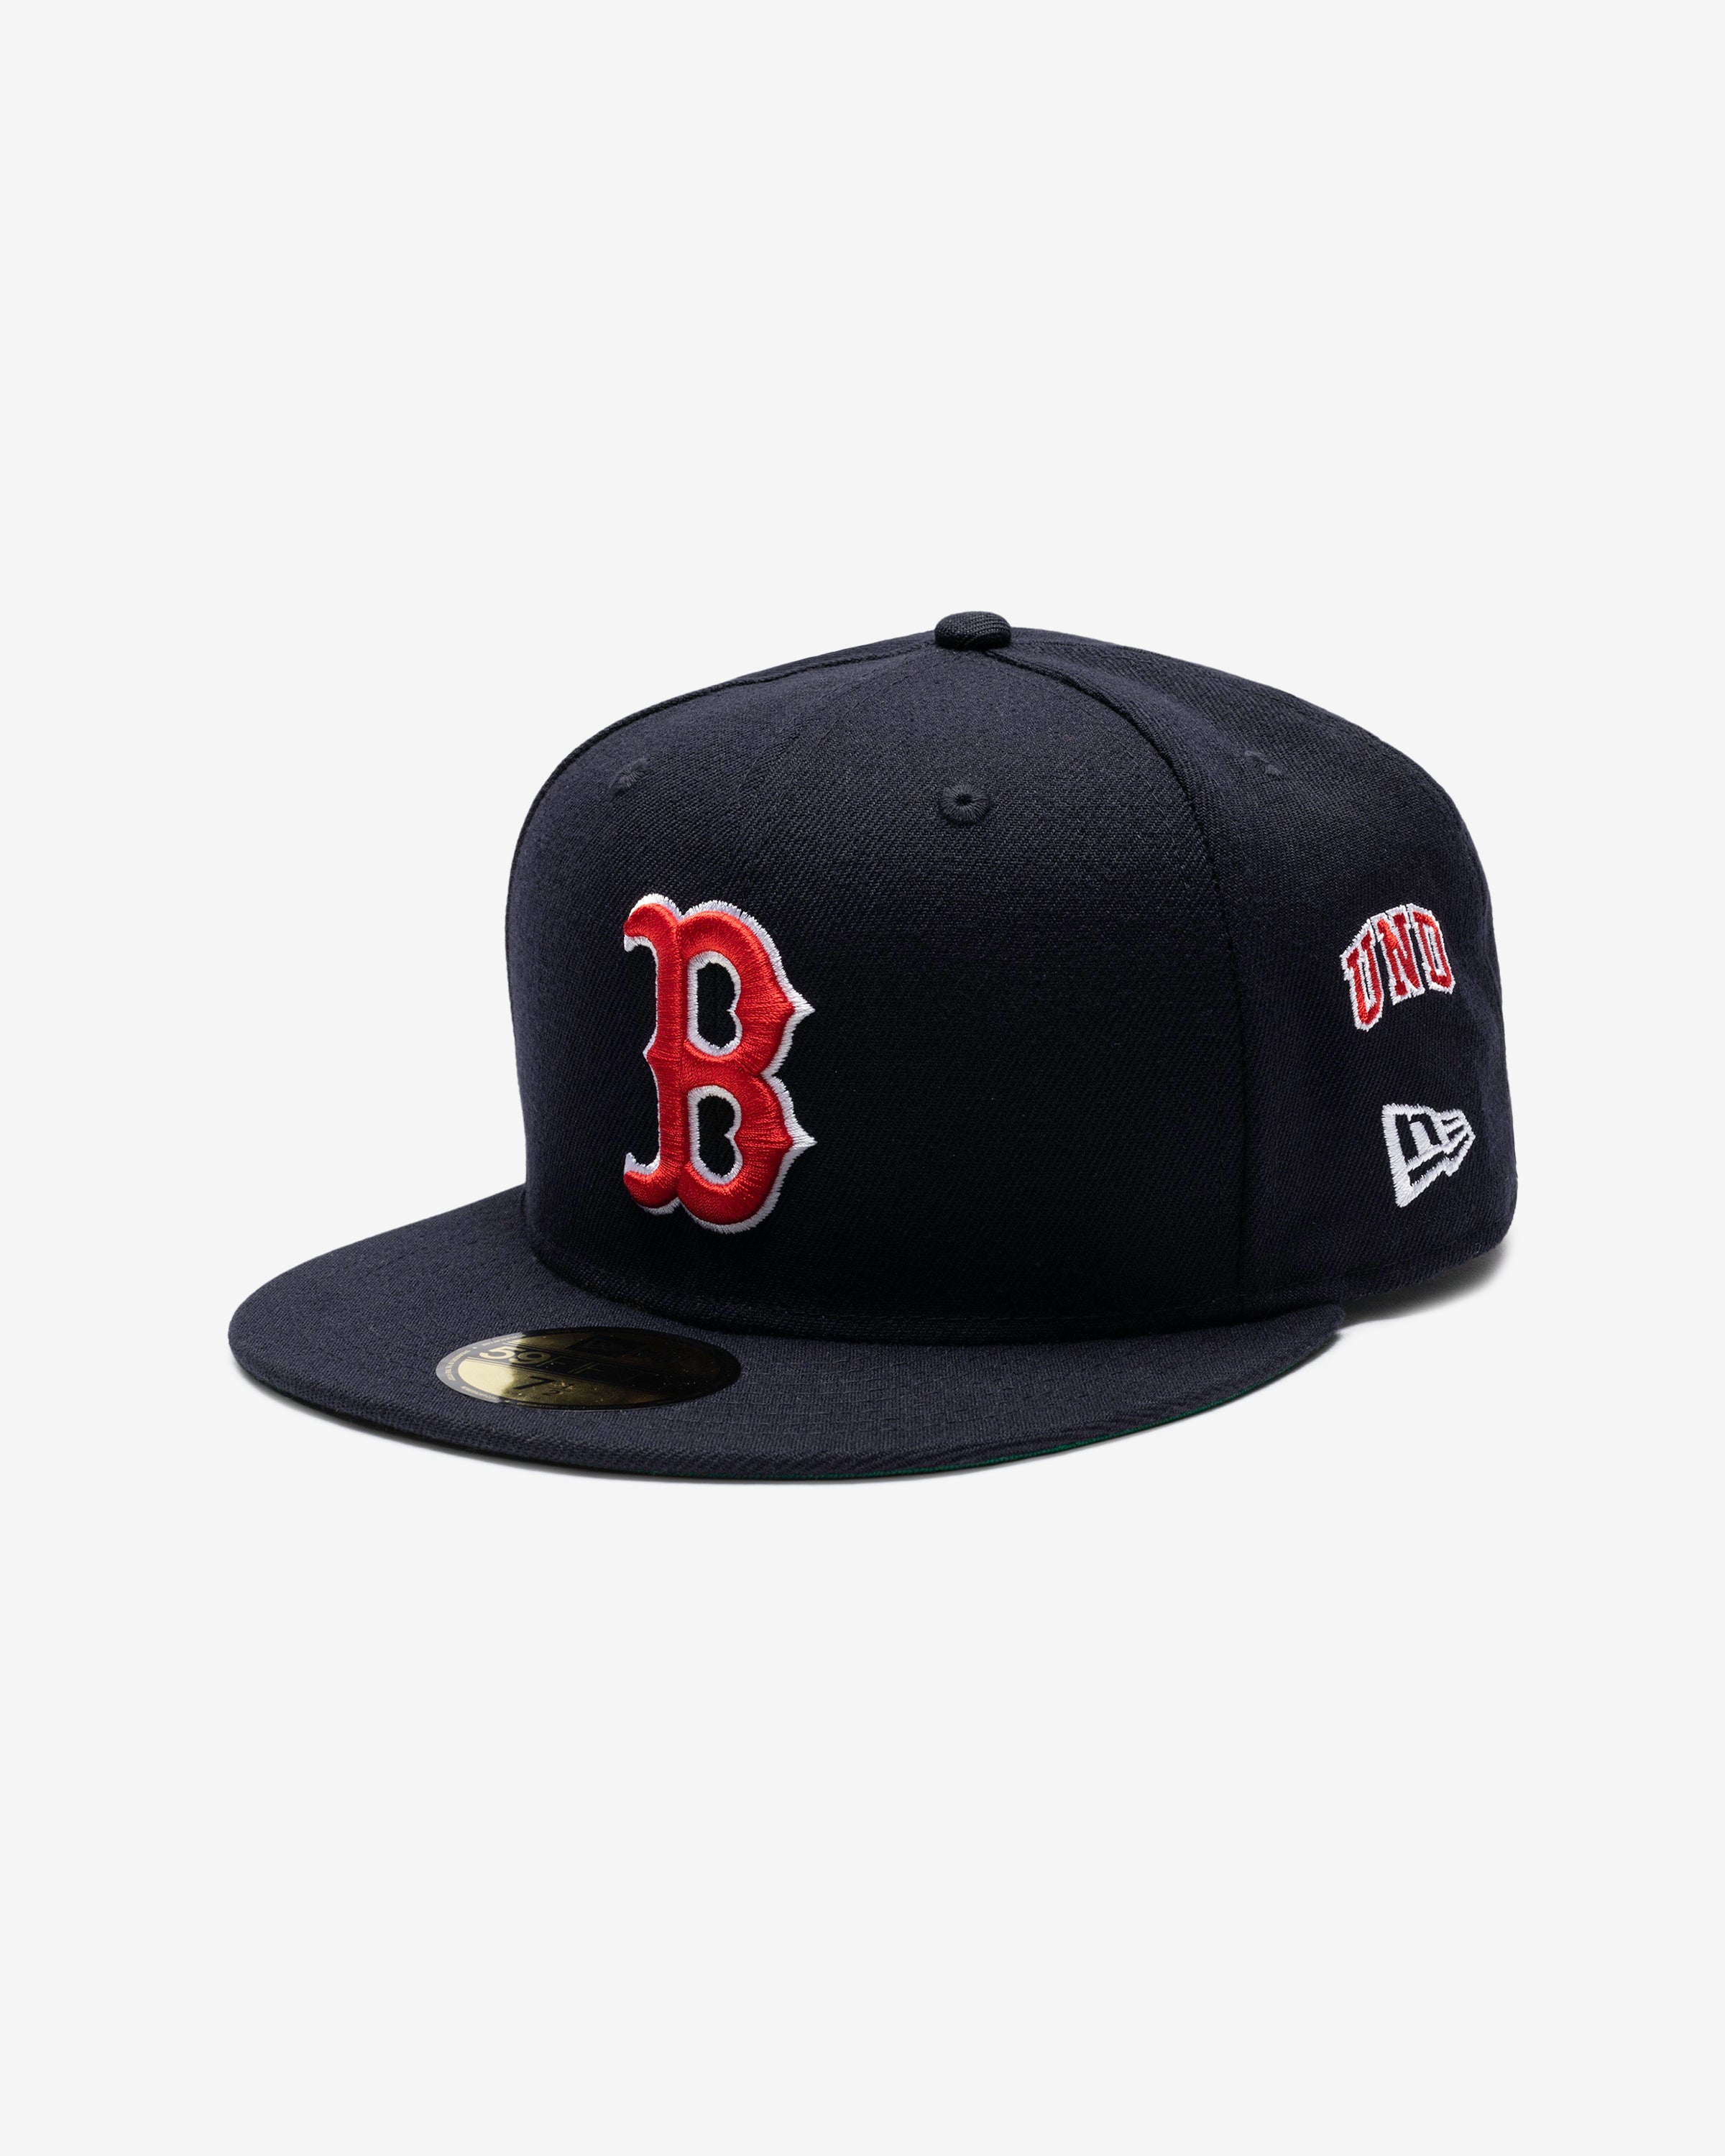 UNDEFEATED X NE X MLB FITTED - BOSTON RED SOX – Undefeated